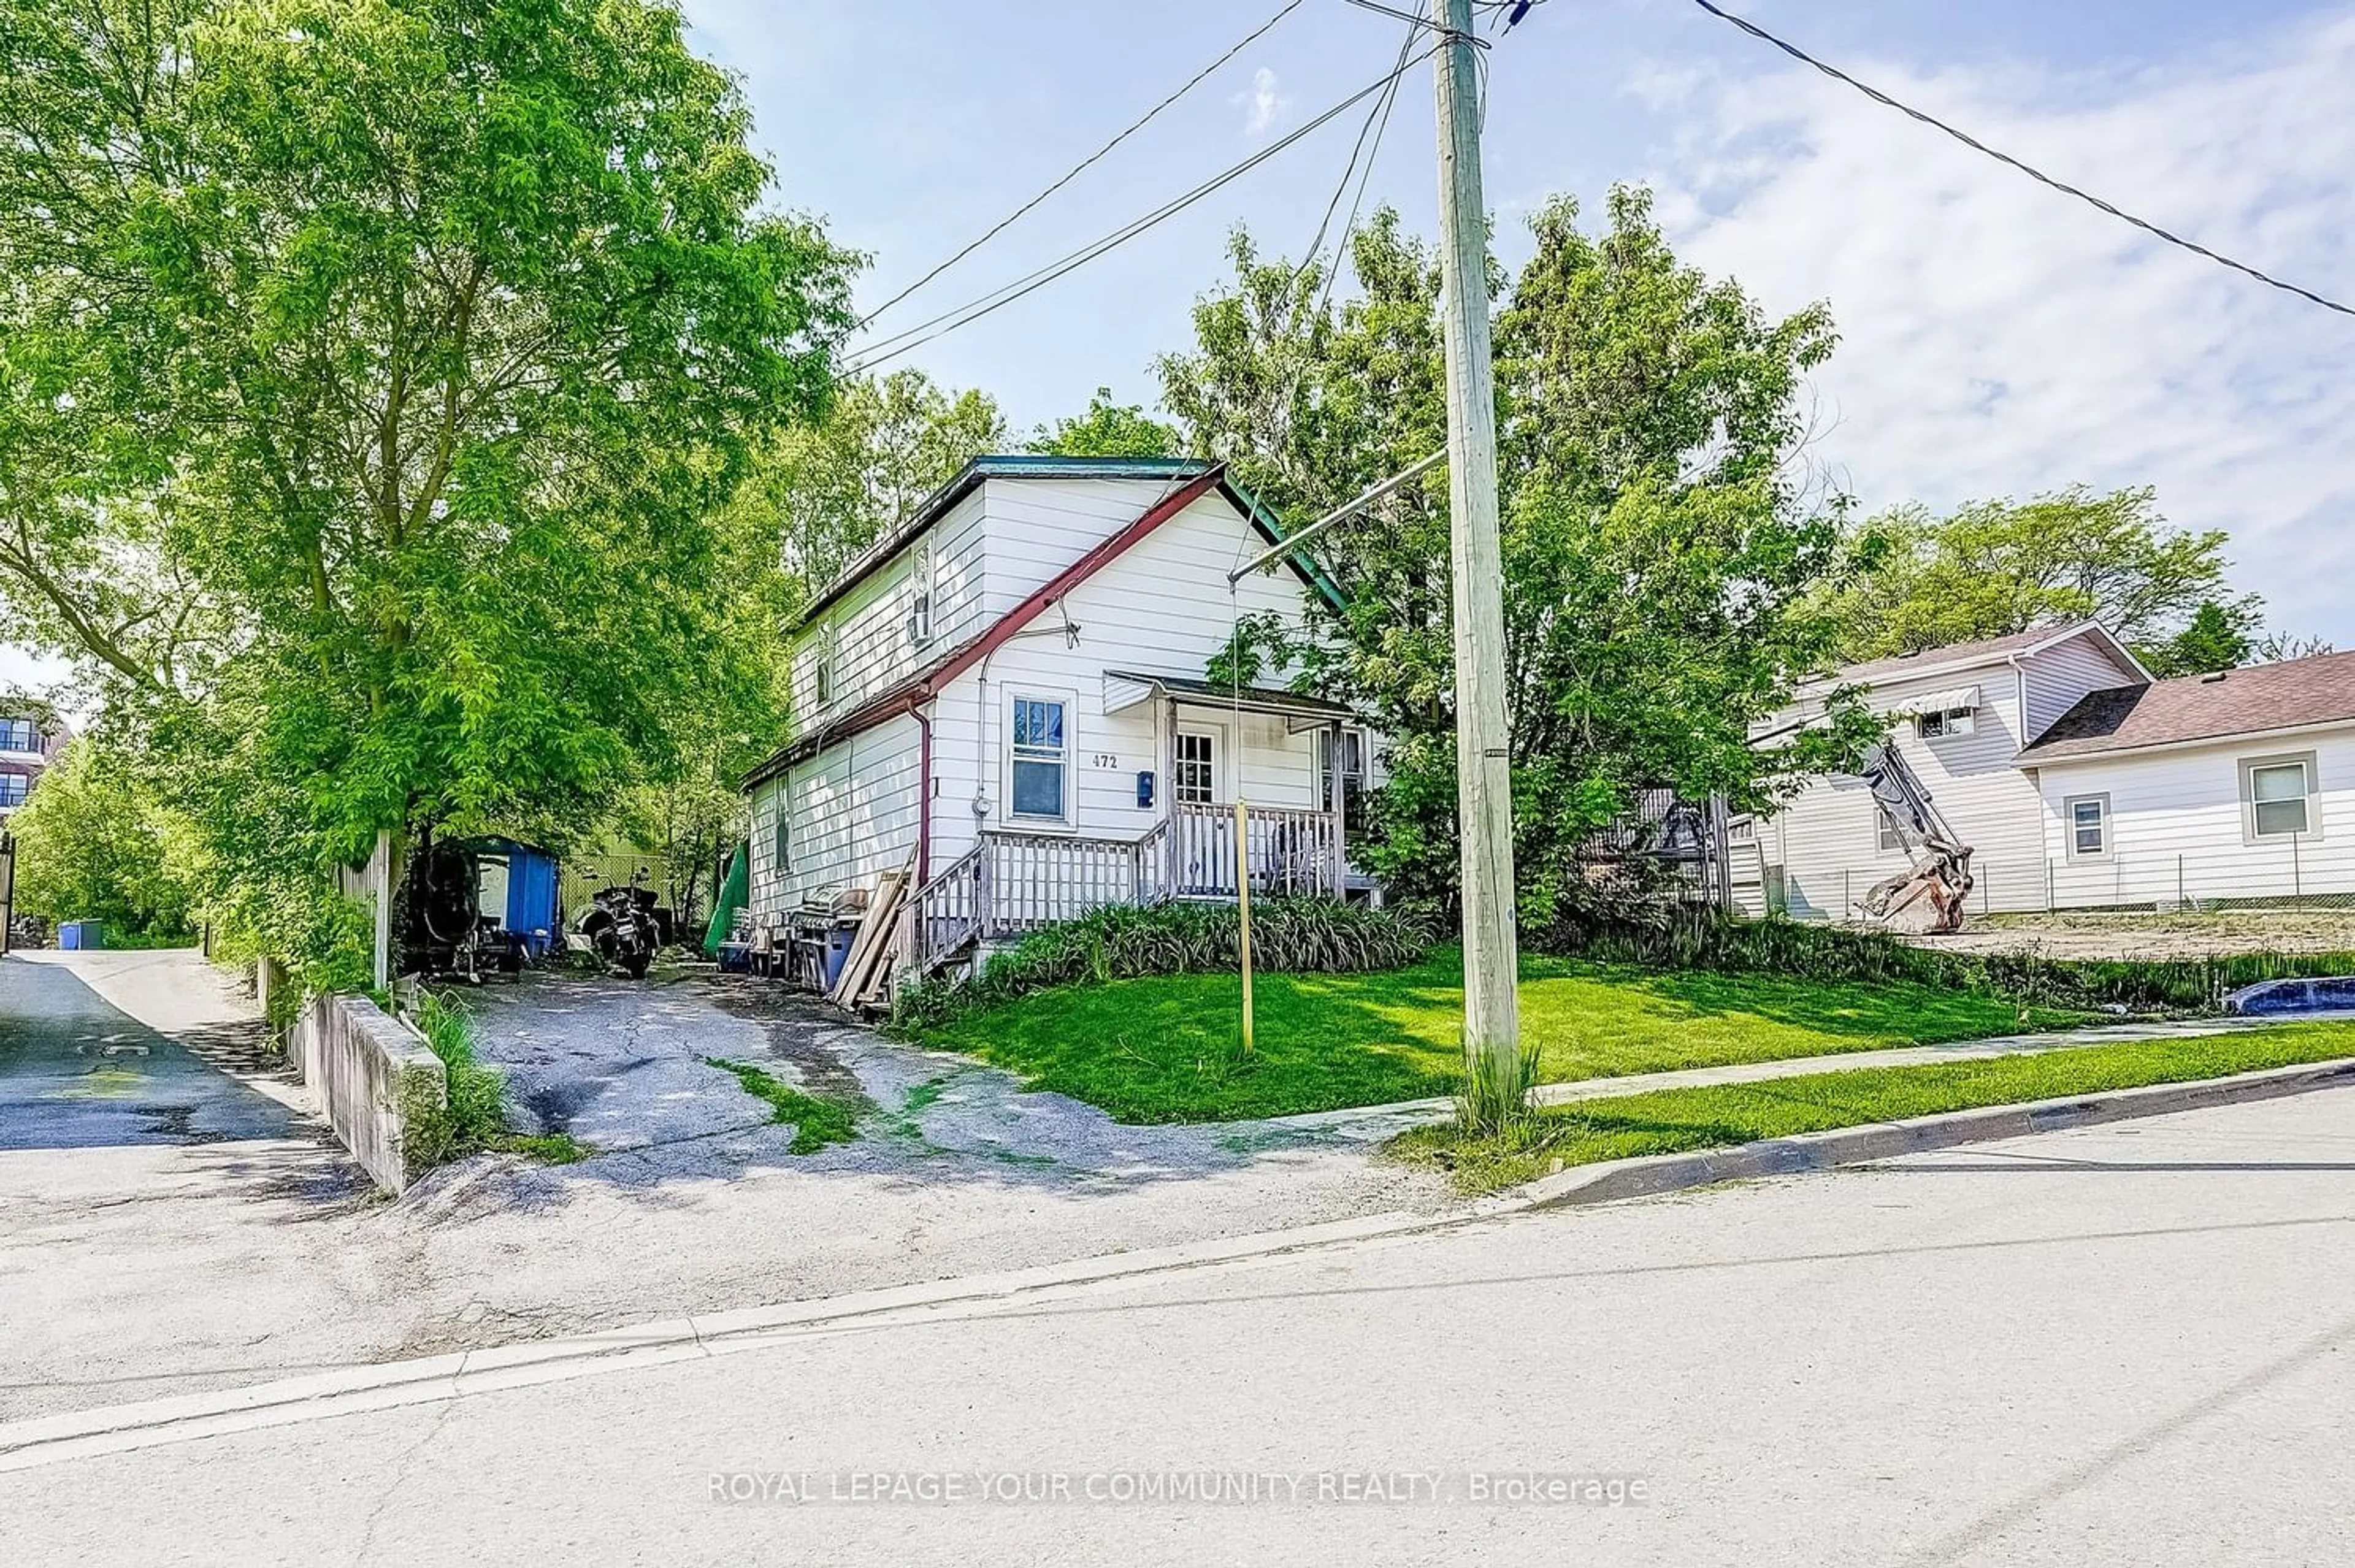 Street view for 472 Ontario St, Newmarket Ontario L3Y 2K7